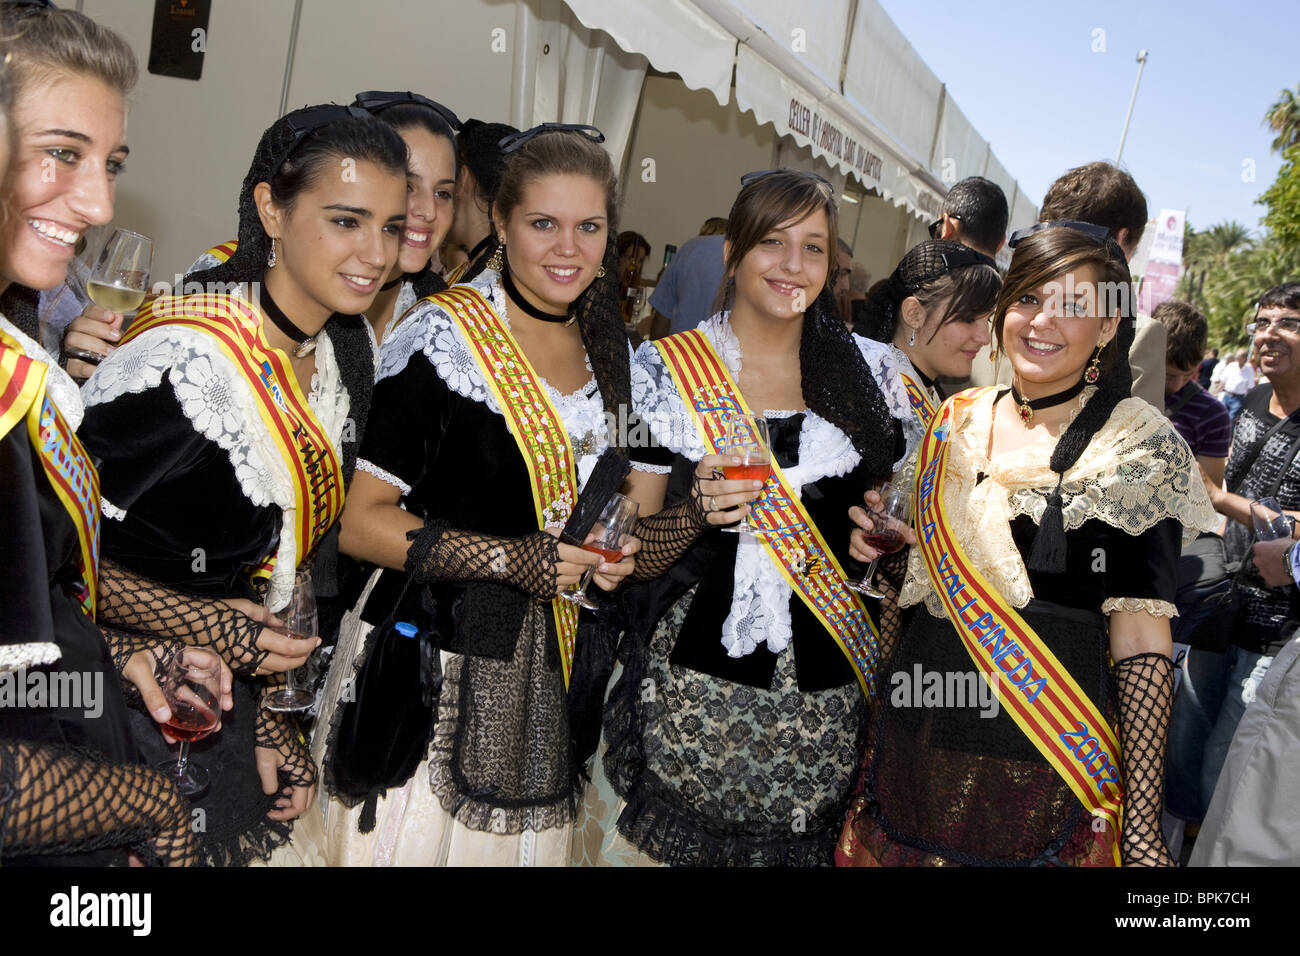 Young women in traditional costumes sampling wines, Sitges, Catalonia, Spain, Europe Stock Photo